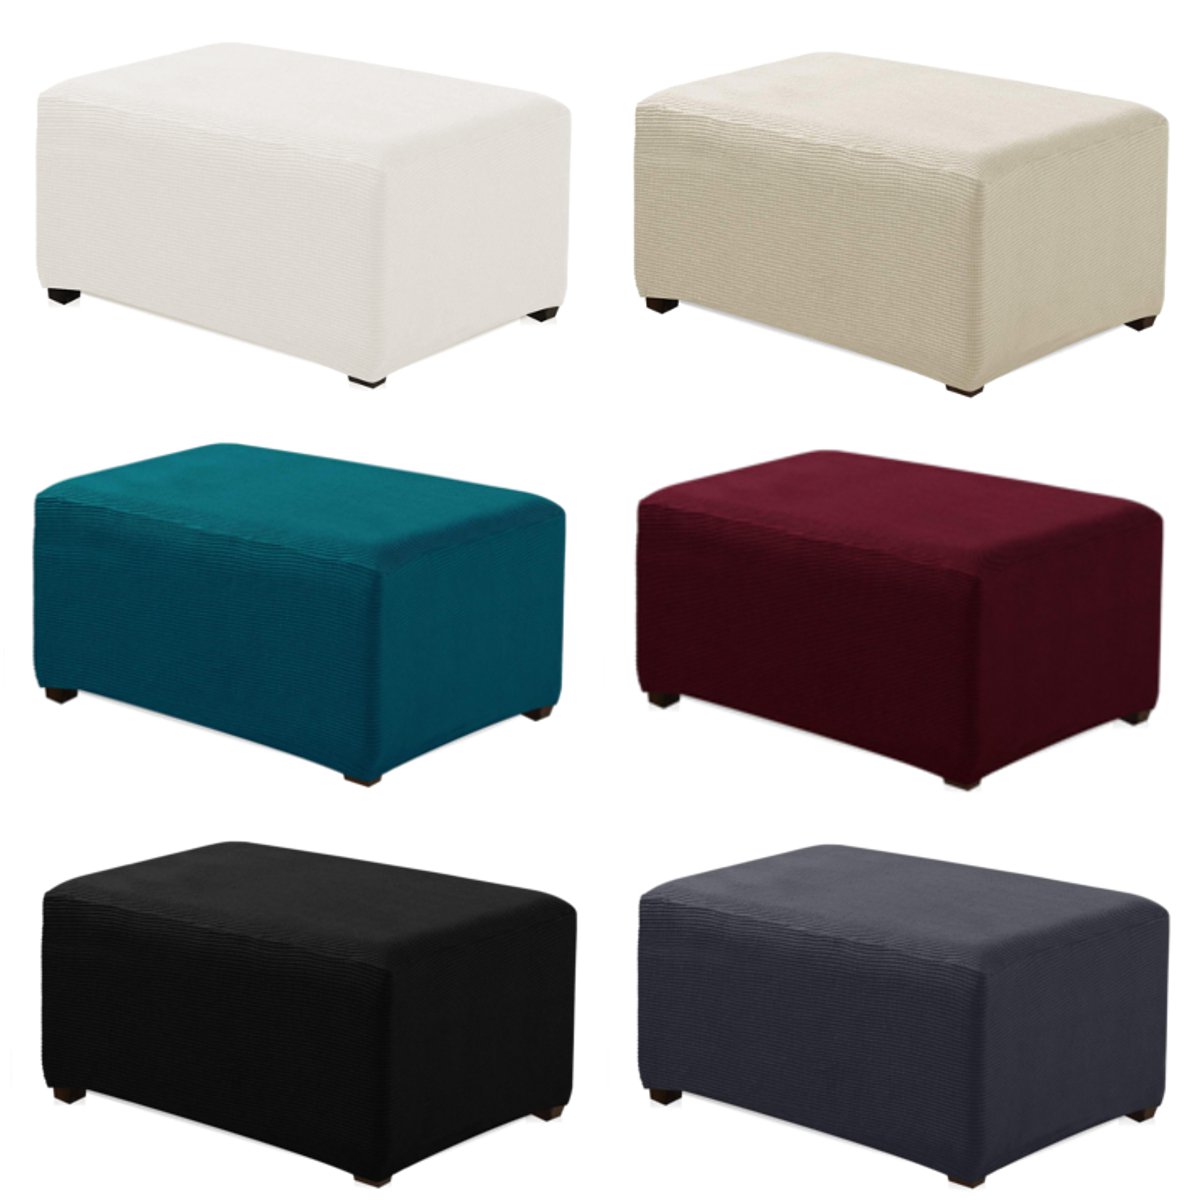 Stretchy Fabric Footstool Cover Square Ottoman Protector Stretch Slipcover for Home Sofa 4